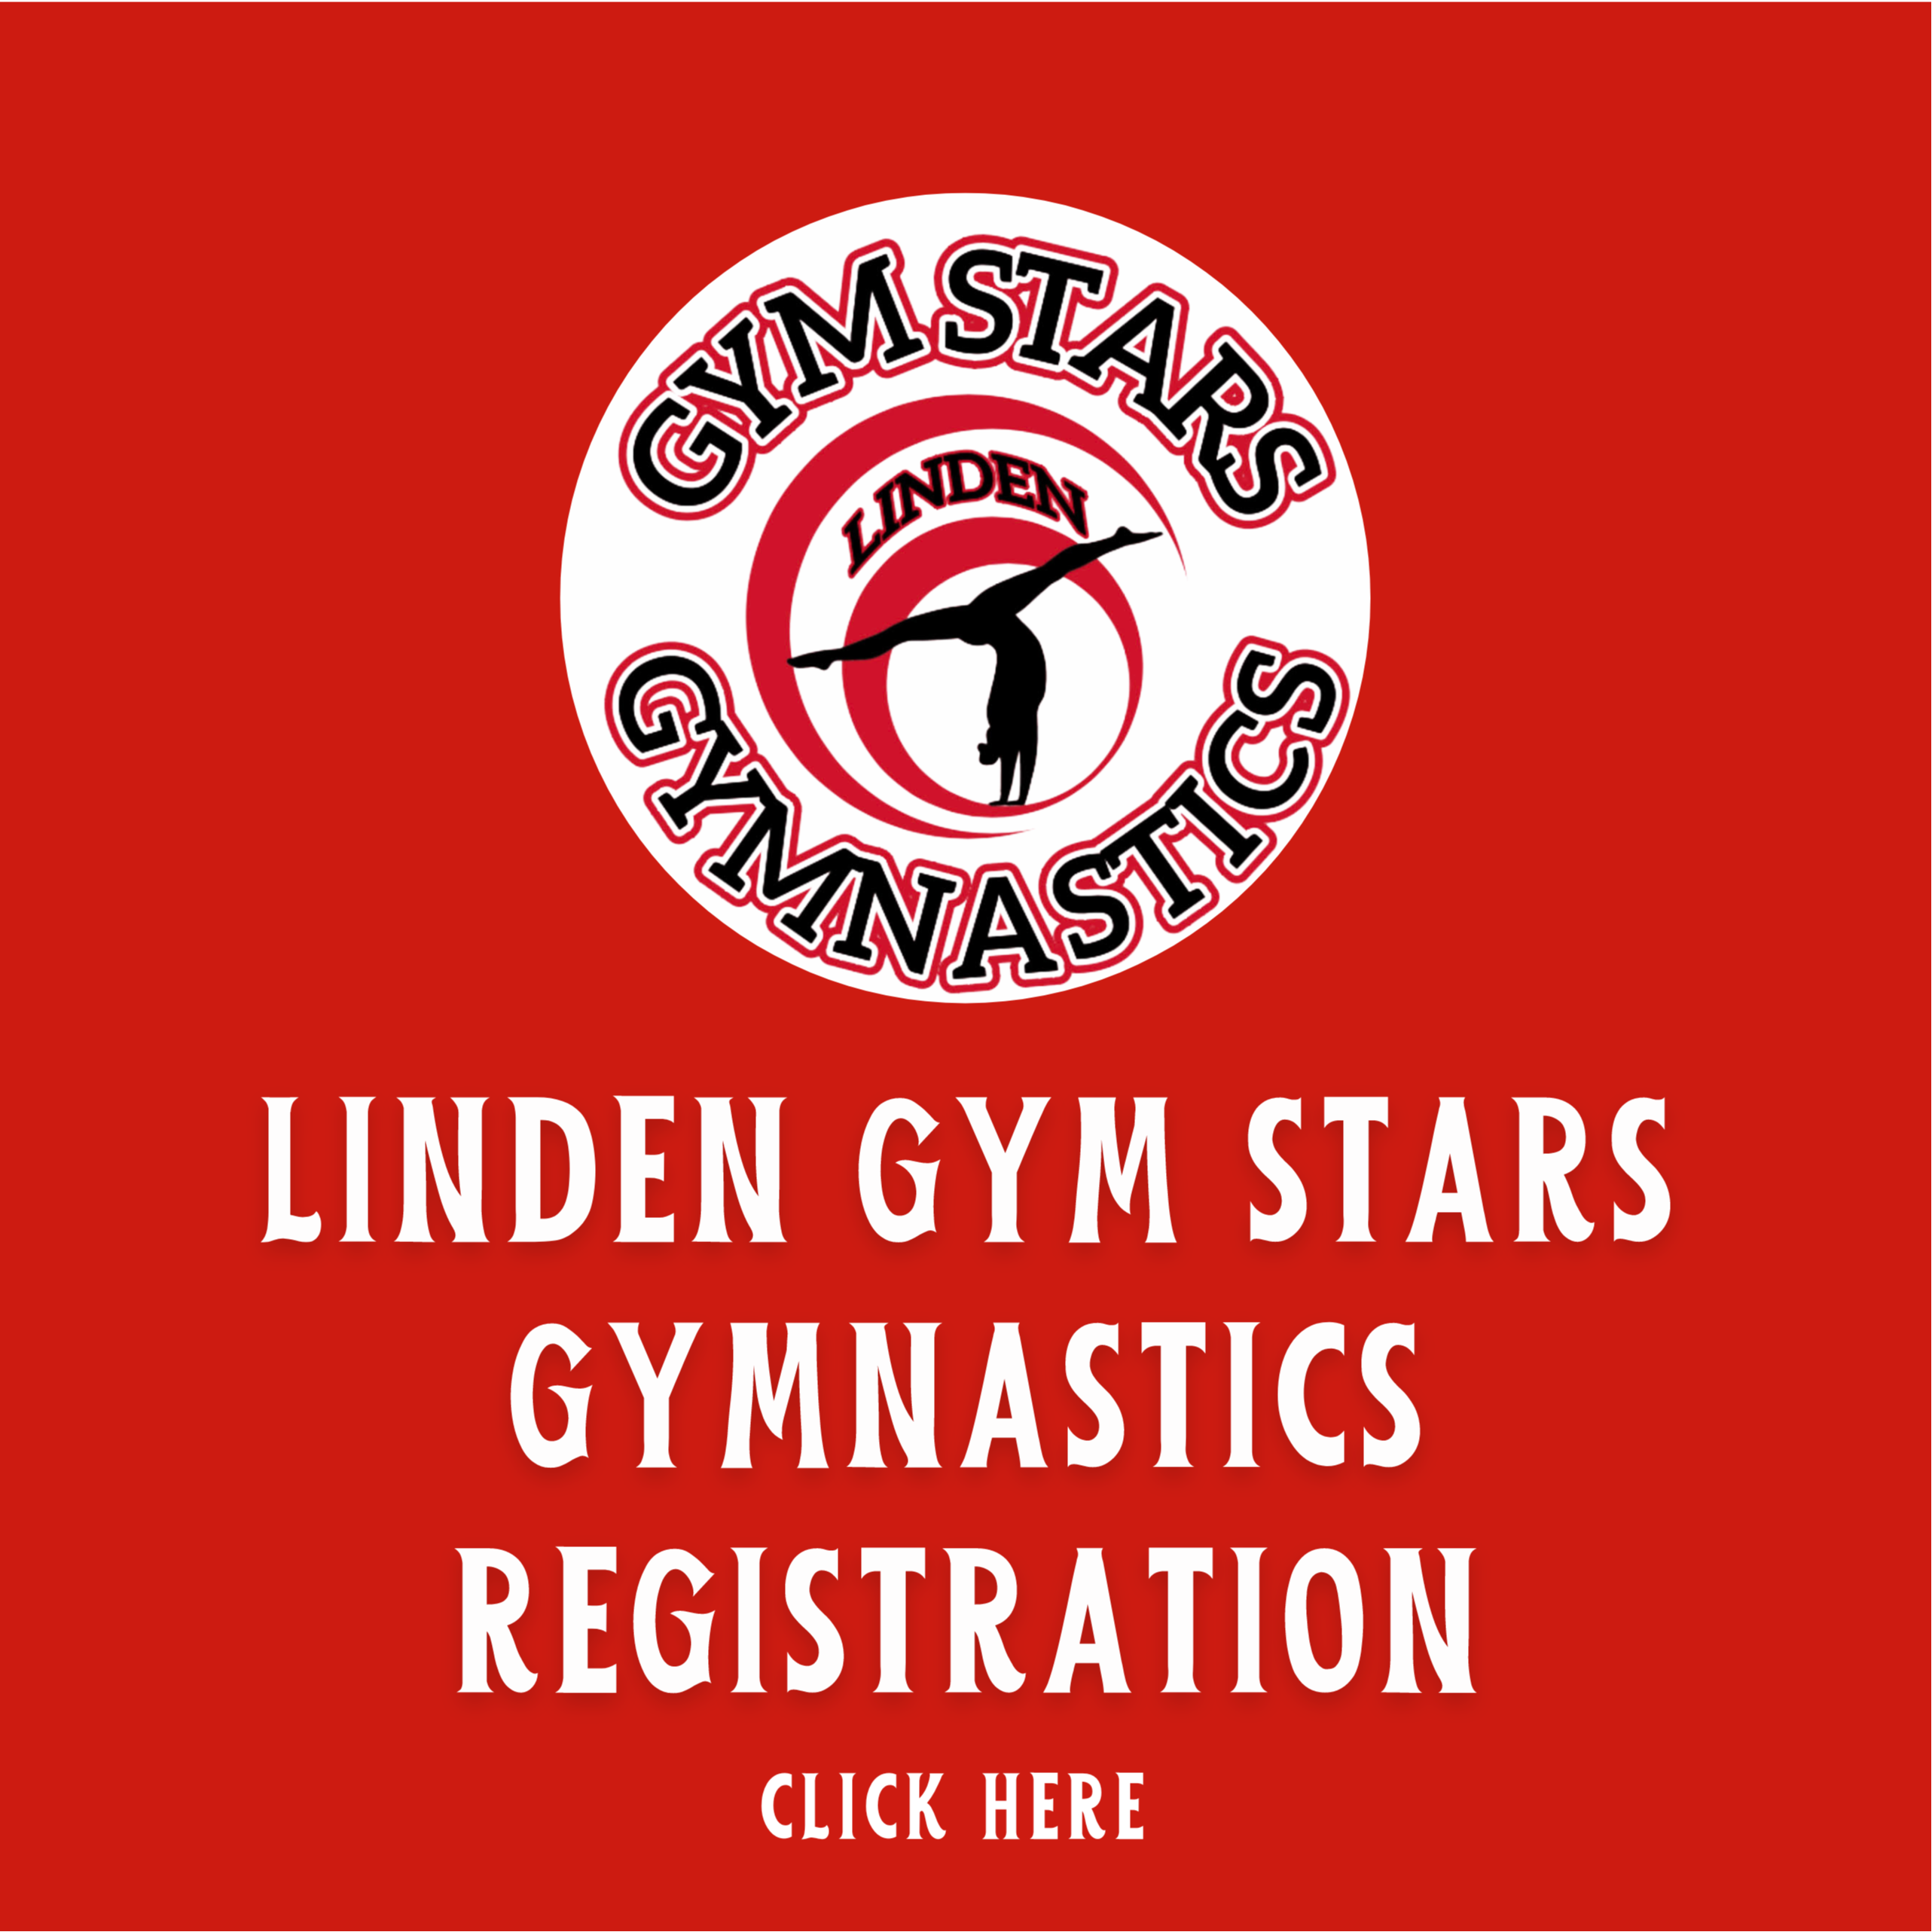 text that says linden gymstars gymnastics click for more info